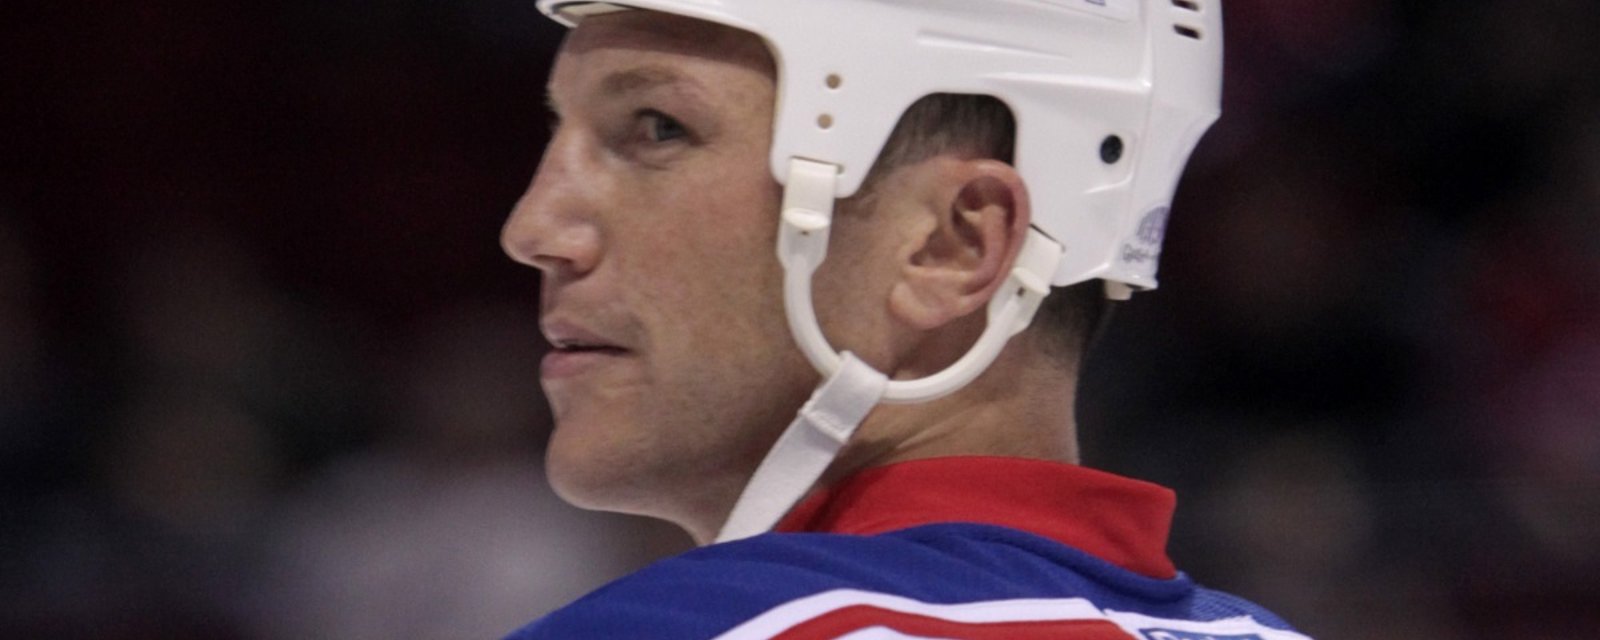 Sean Avery arraigned in court, facing jail time.